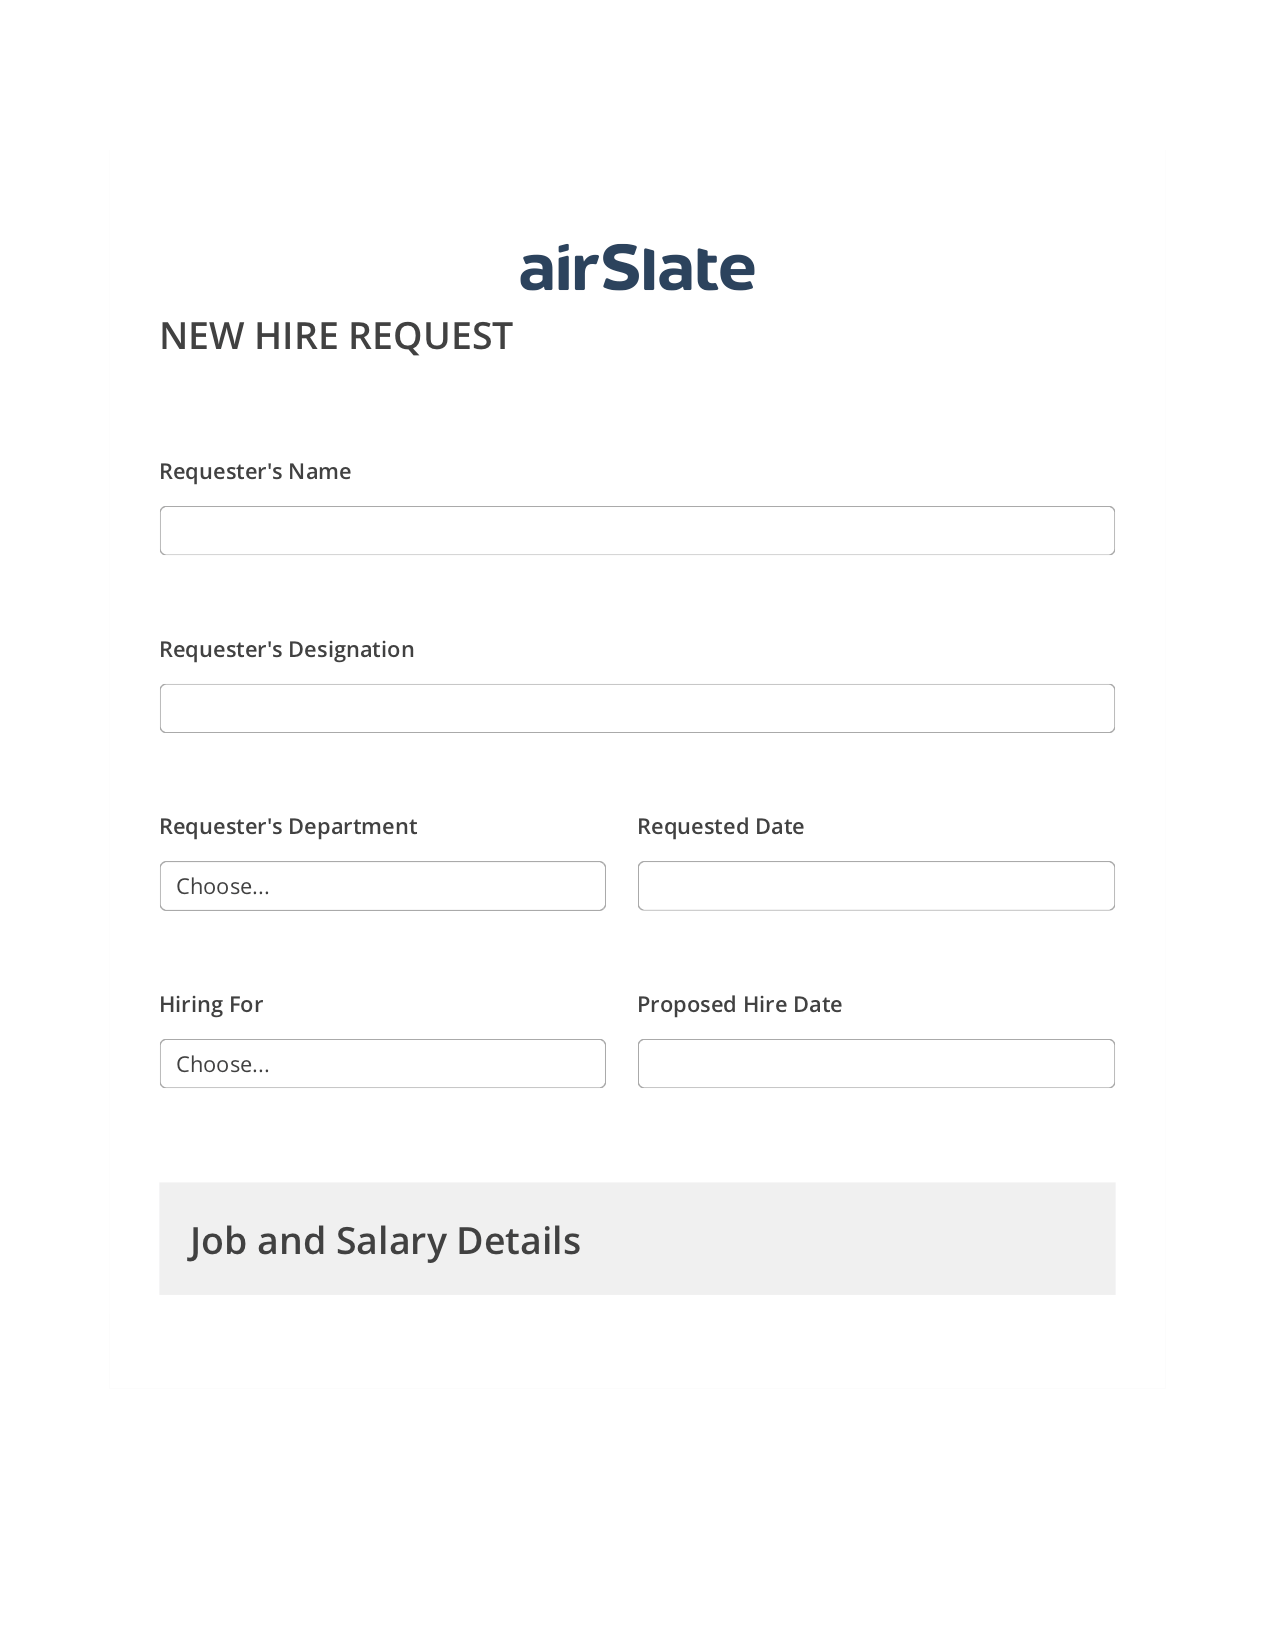 Hiring Request Workflow Pre-fill Dropdowns from CSV file Bot, Add Tags to Slate Bot, Archive to Dropbox Bot